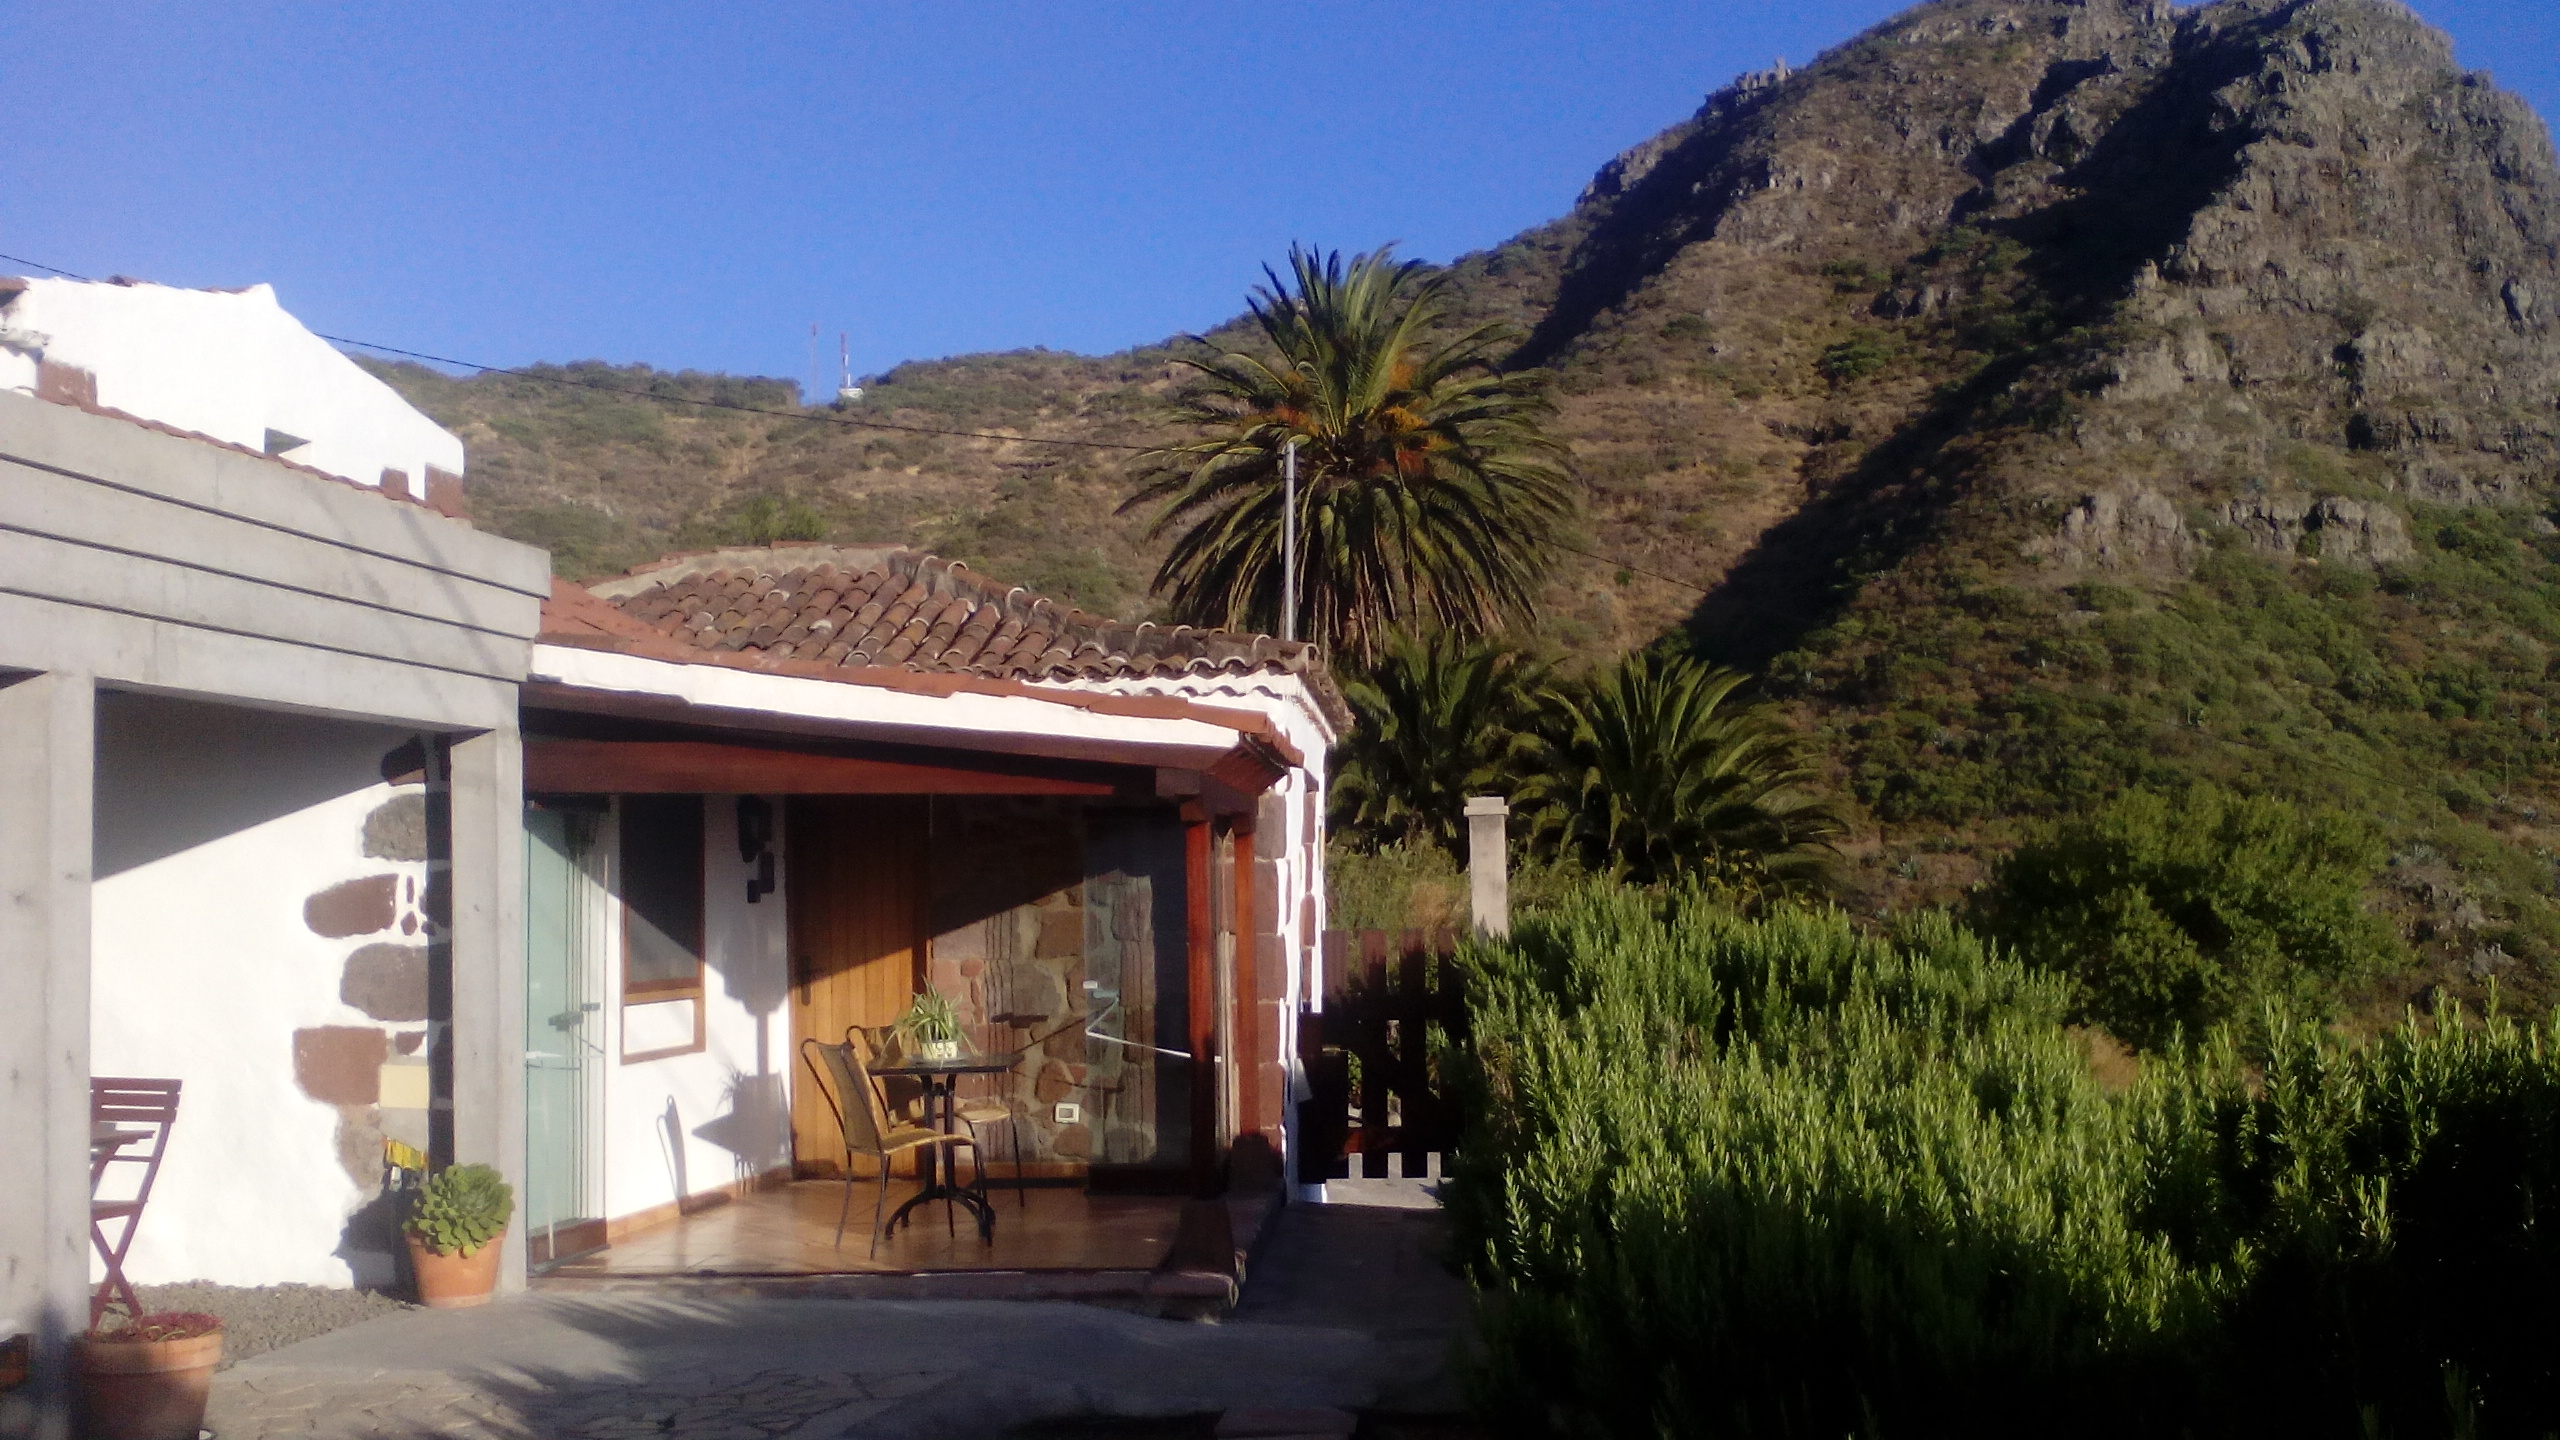 Super-cosy cottage for 2-3 people in the mountains with amazing views to La Gomera